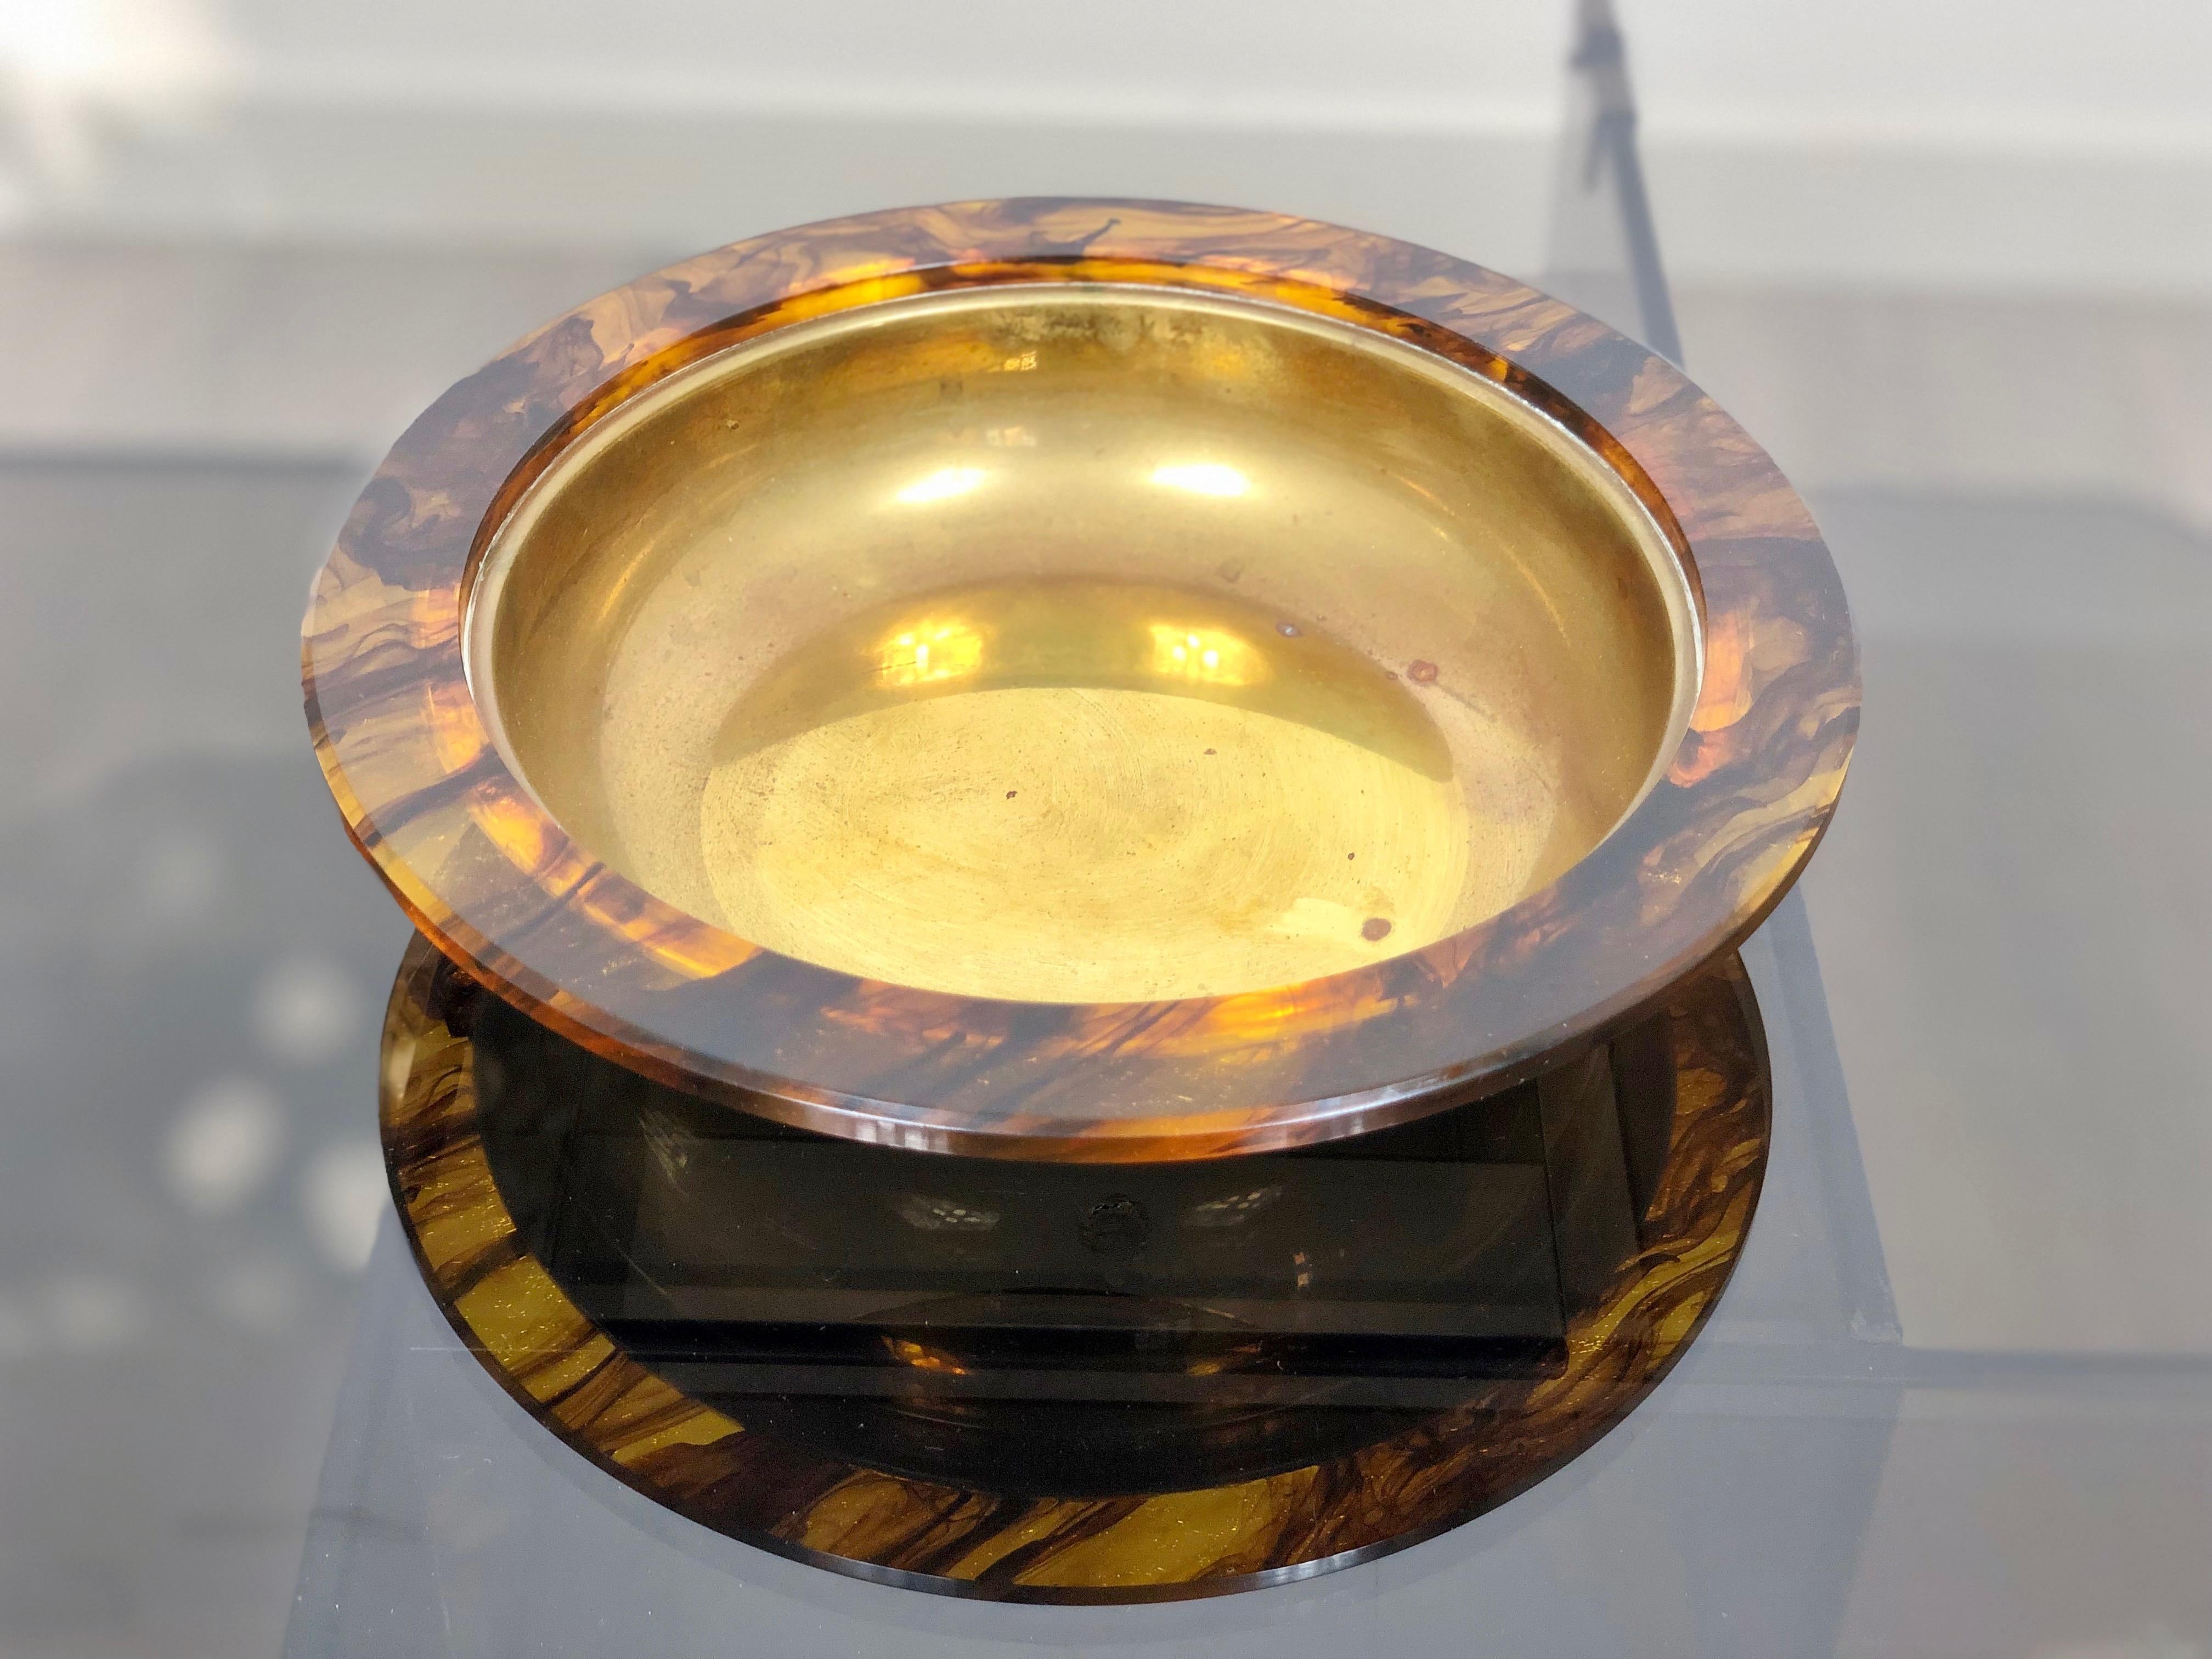 Centerpiece plate in faux tortoiseshell Lucite and brass interior, Italy, circa 1960.